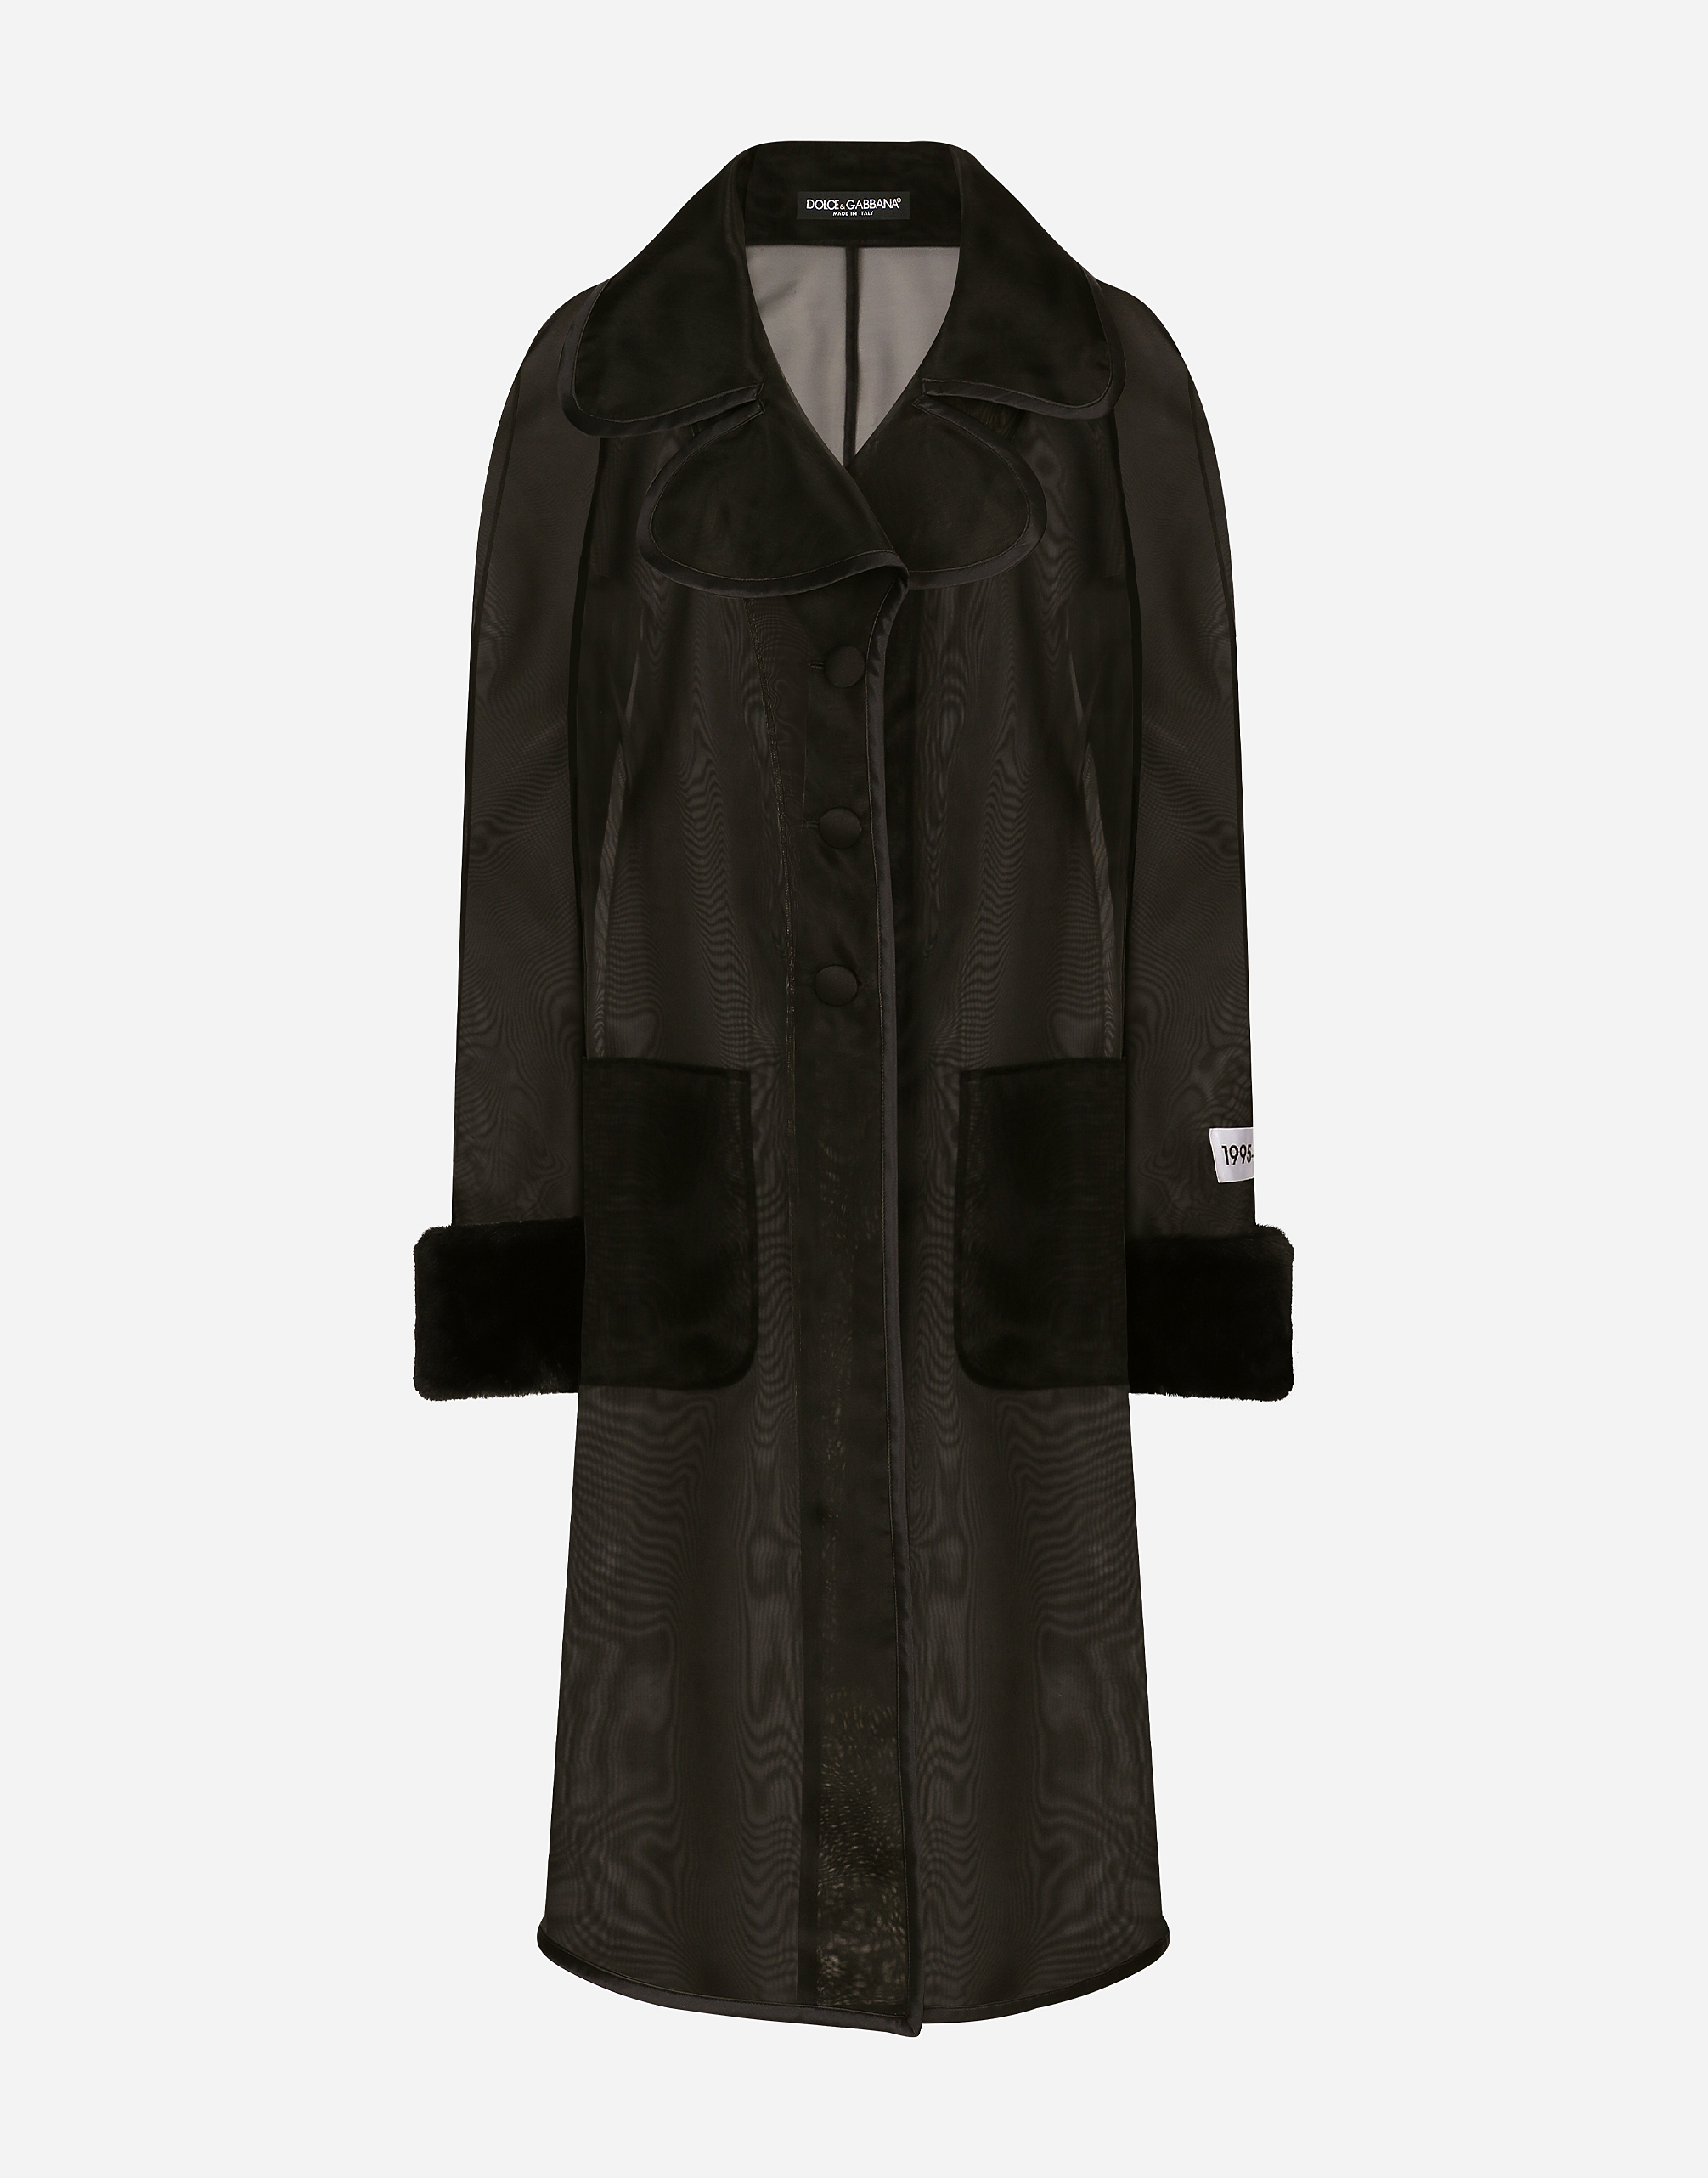 KIM DOLCE&GABBANA Organza trench coat with the Re-Edition label in Black